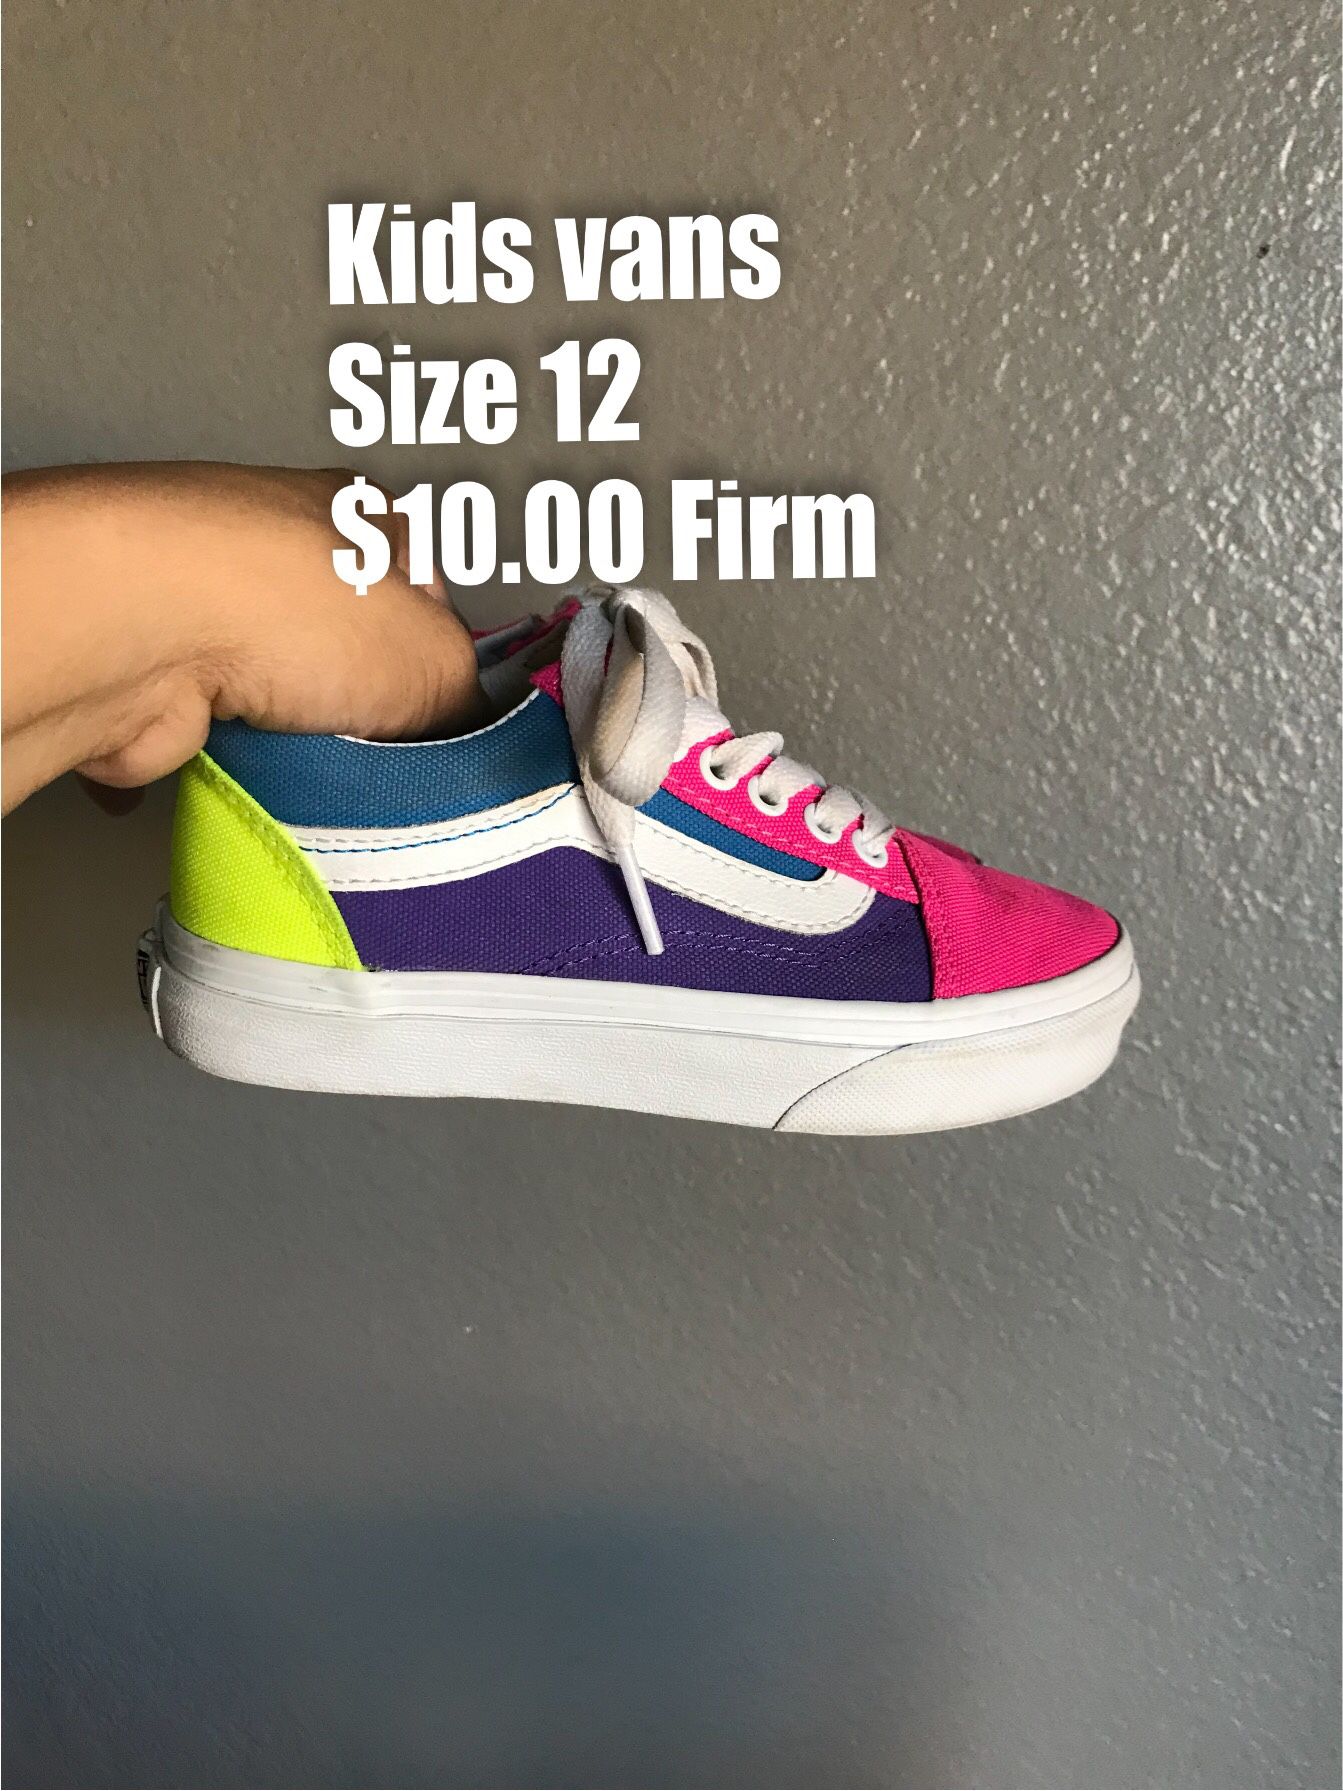 Beautiful  Vans Kids Us  Size 12  Price Is Firm /Located In Hesperia CA/no Delivery Or Shipping  